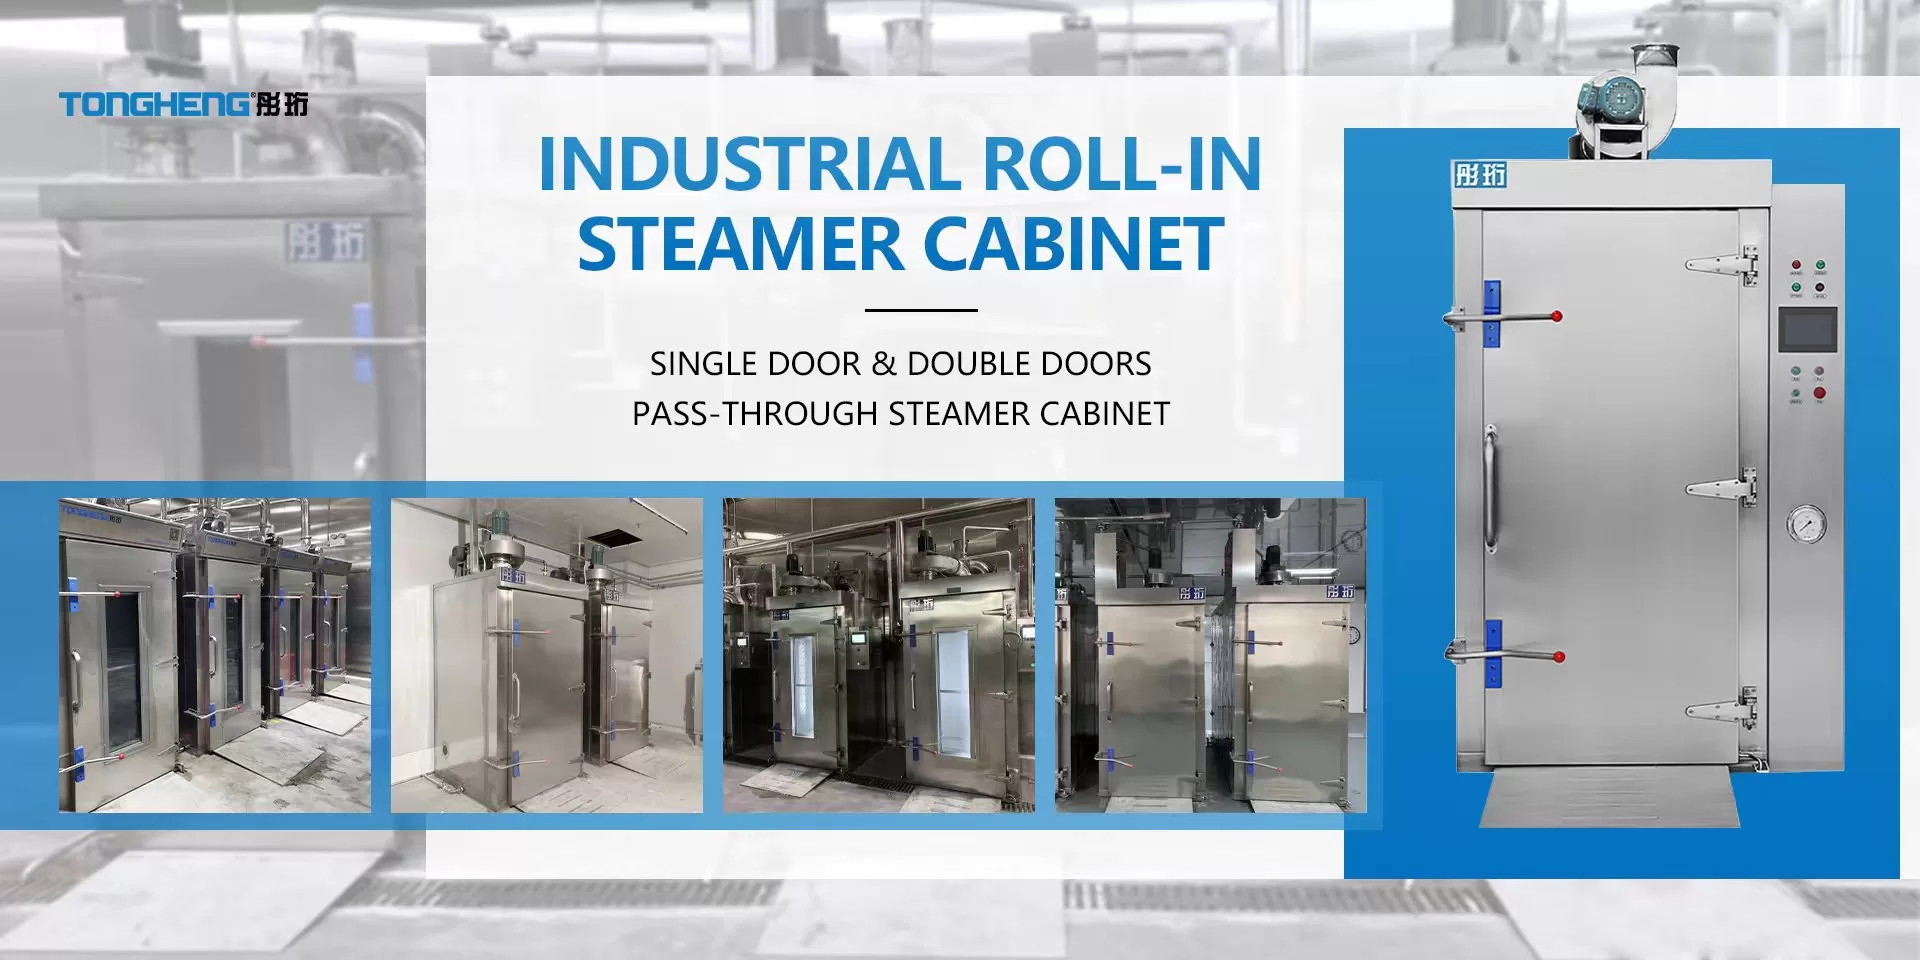 INDUSTRIAL ROLL-IN STEAM CABINET